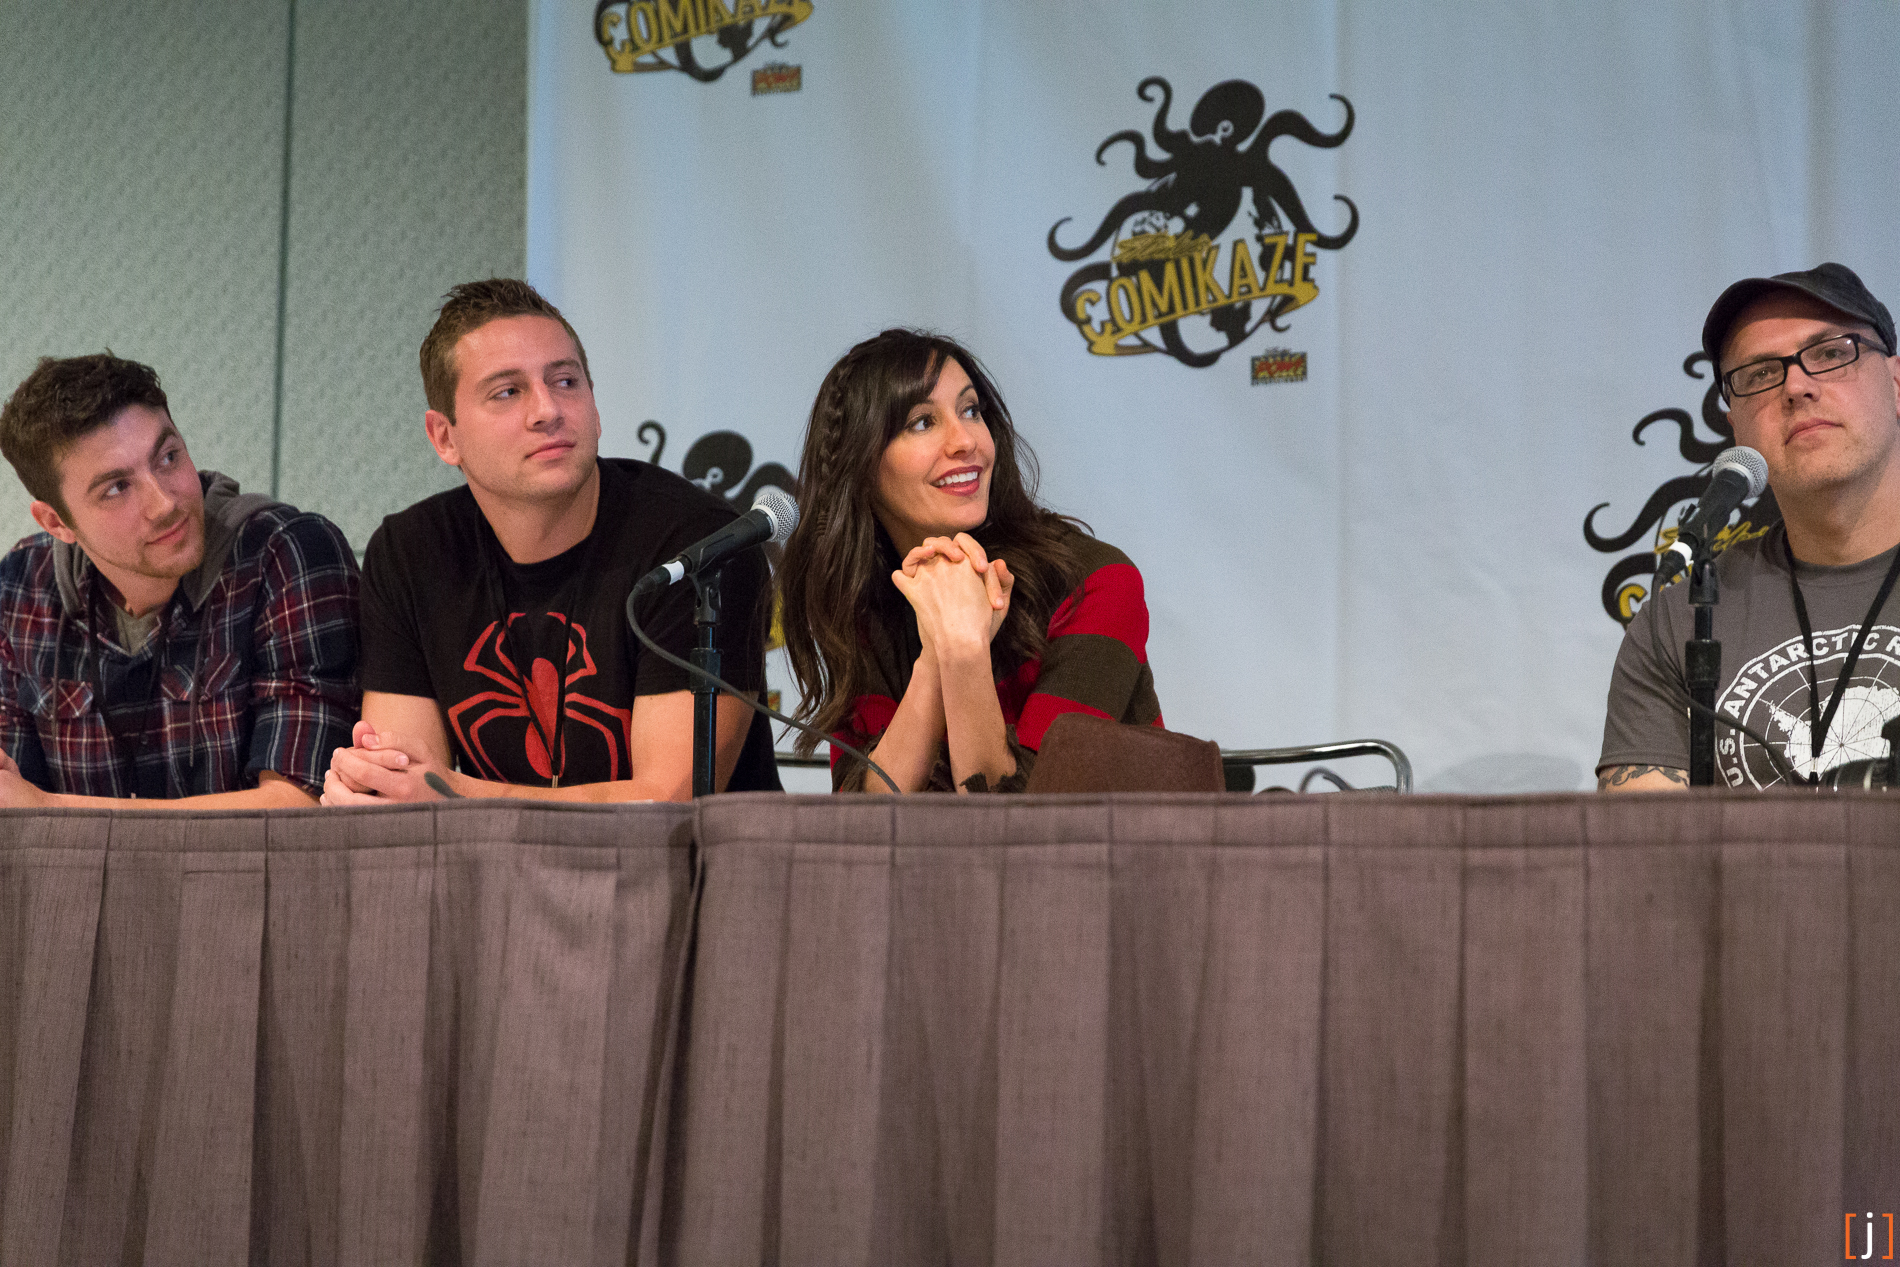 Carter, Ed Ricker, Charlene Amoia, and Ari Kirschenbaum at a Q&A following Live Evil's screening at Stan Lee's Comikaze Expo.